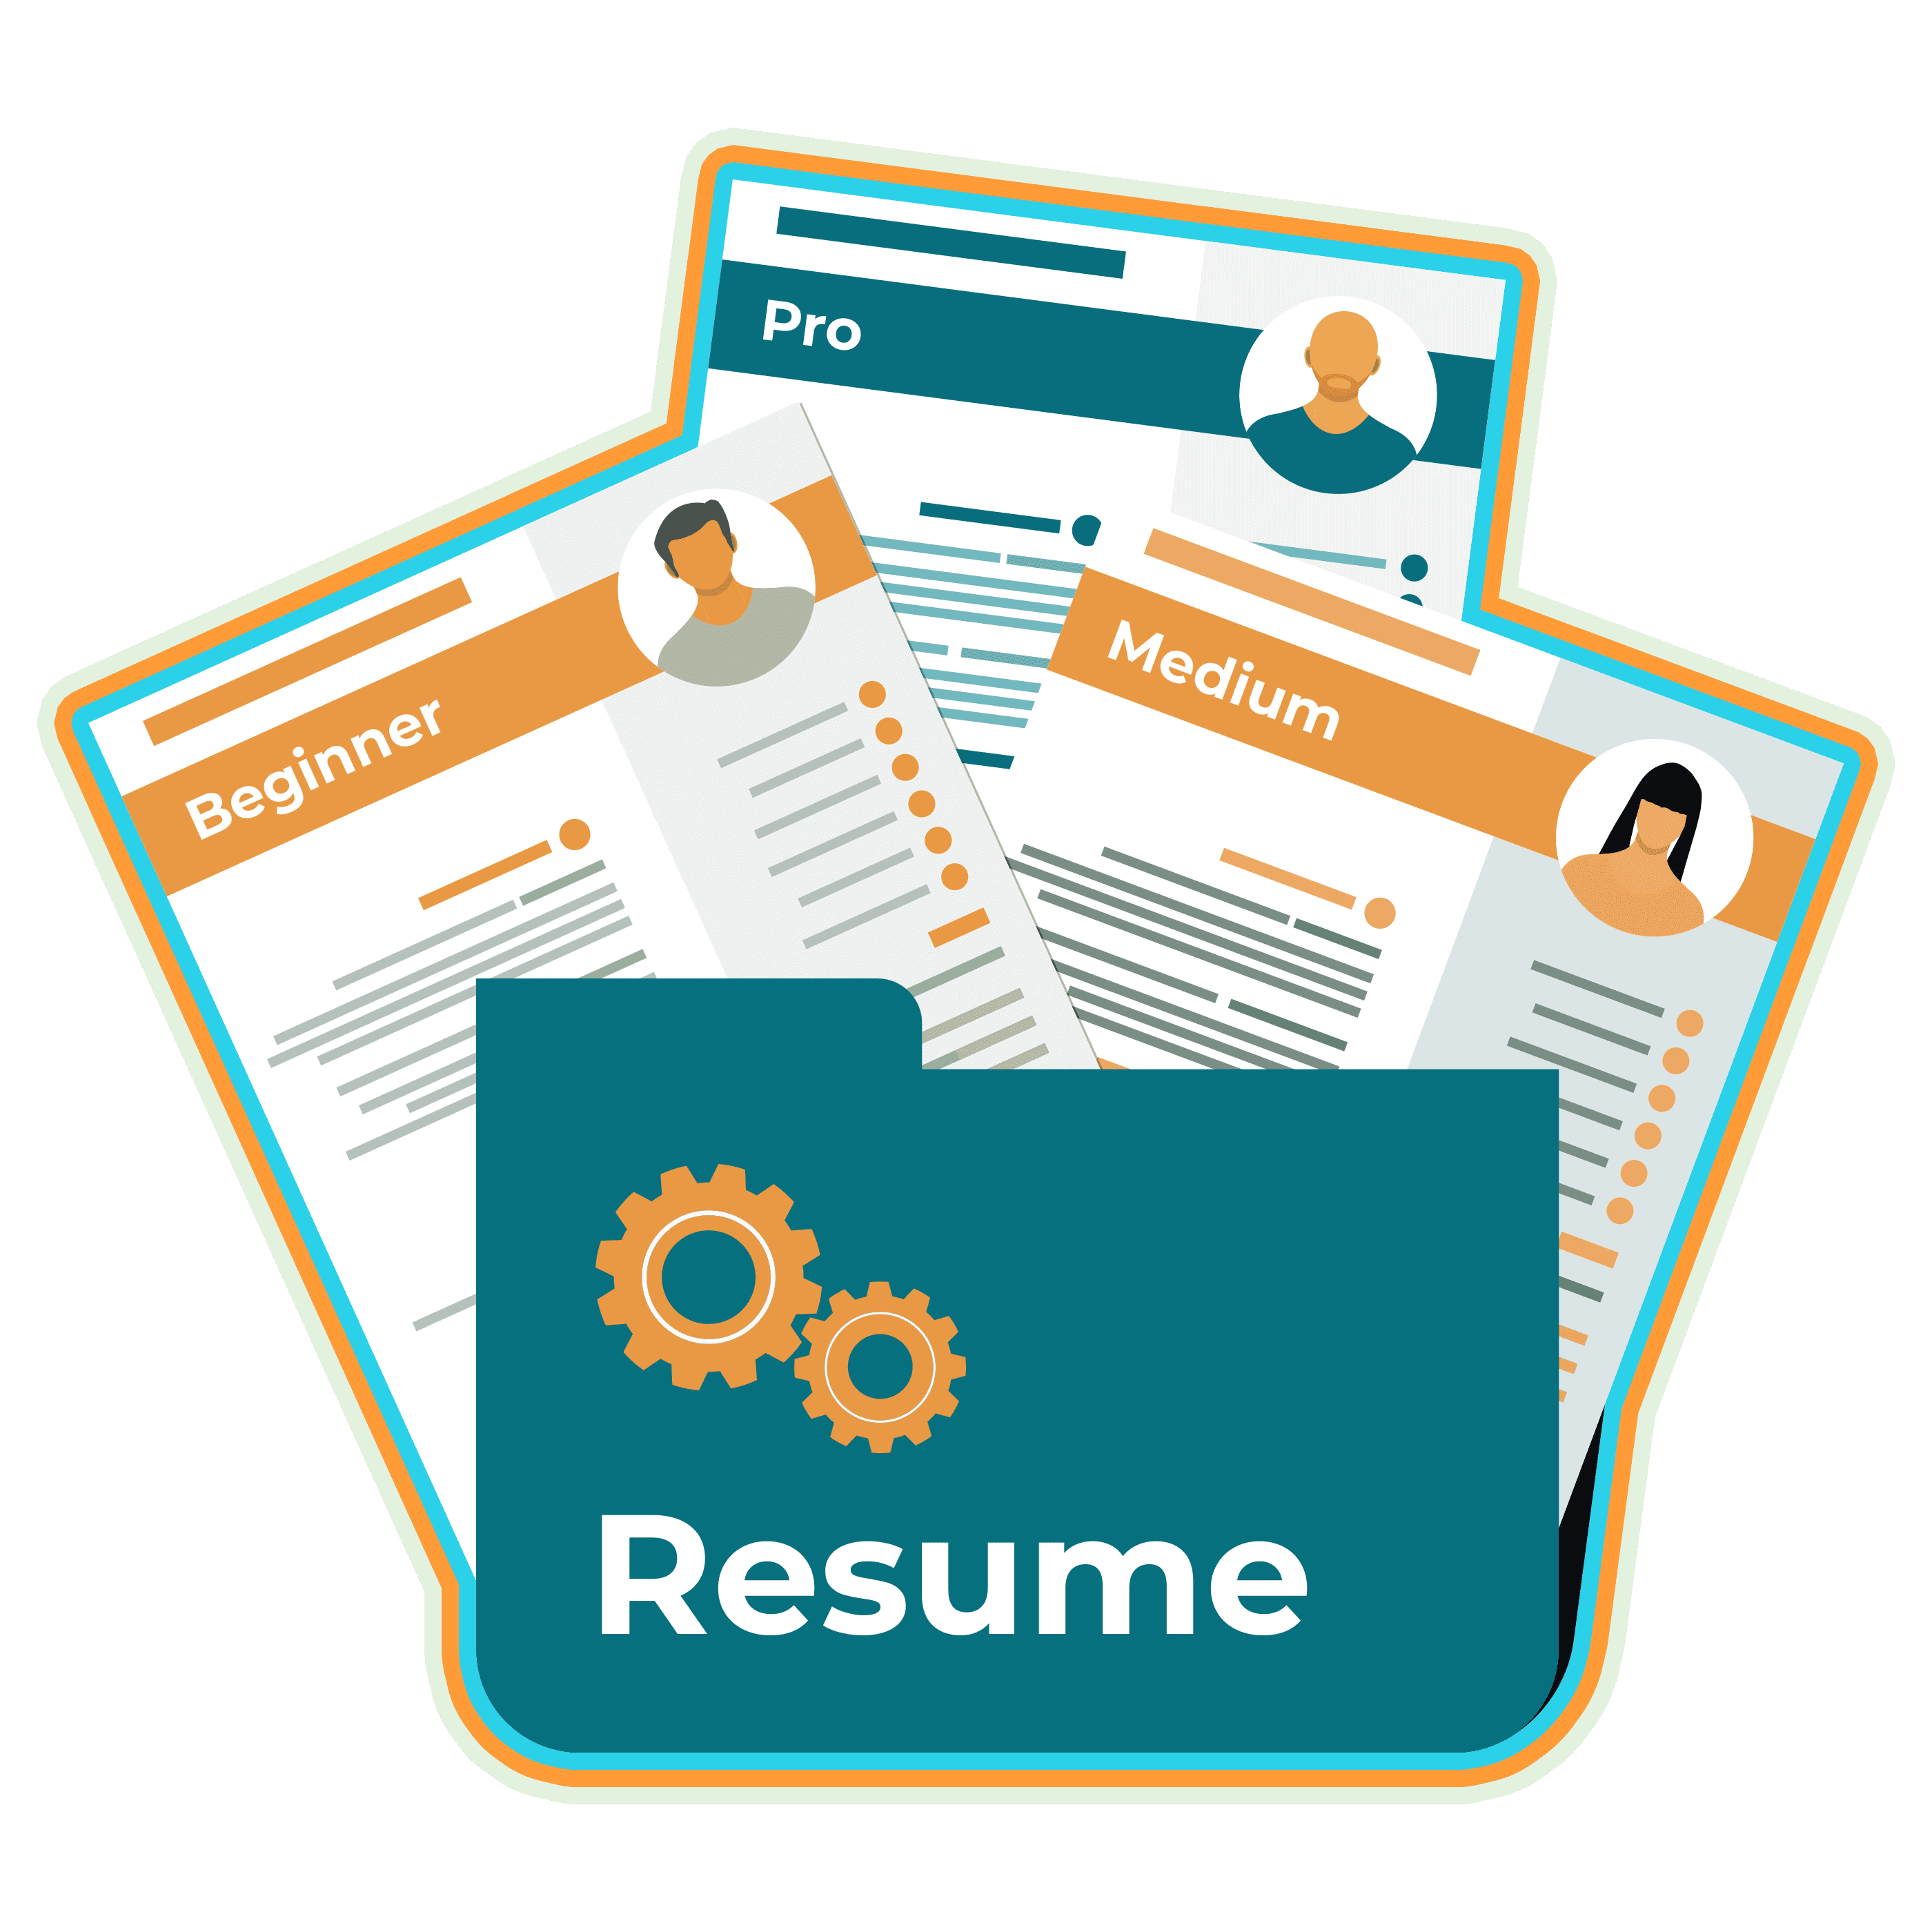 resume work experience section on resume